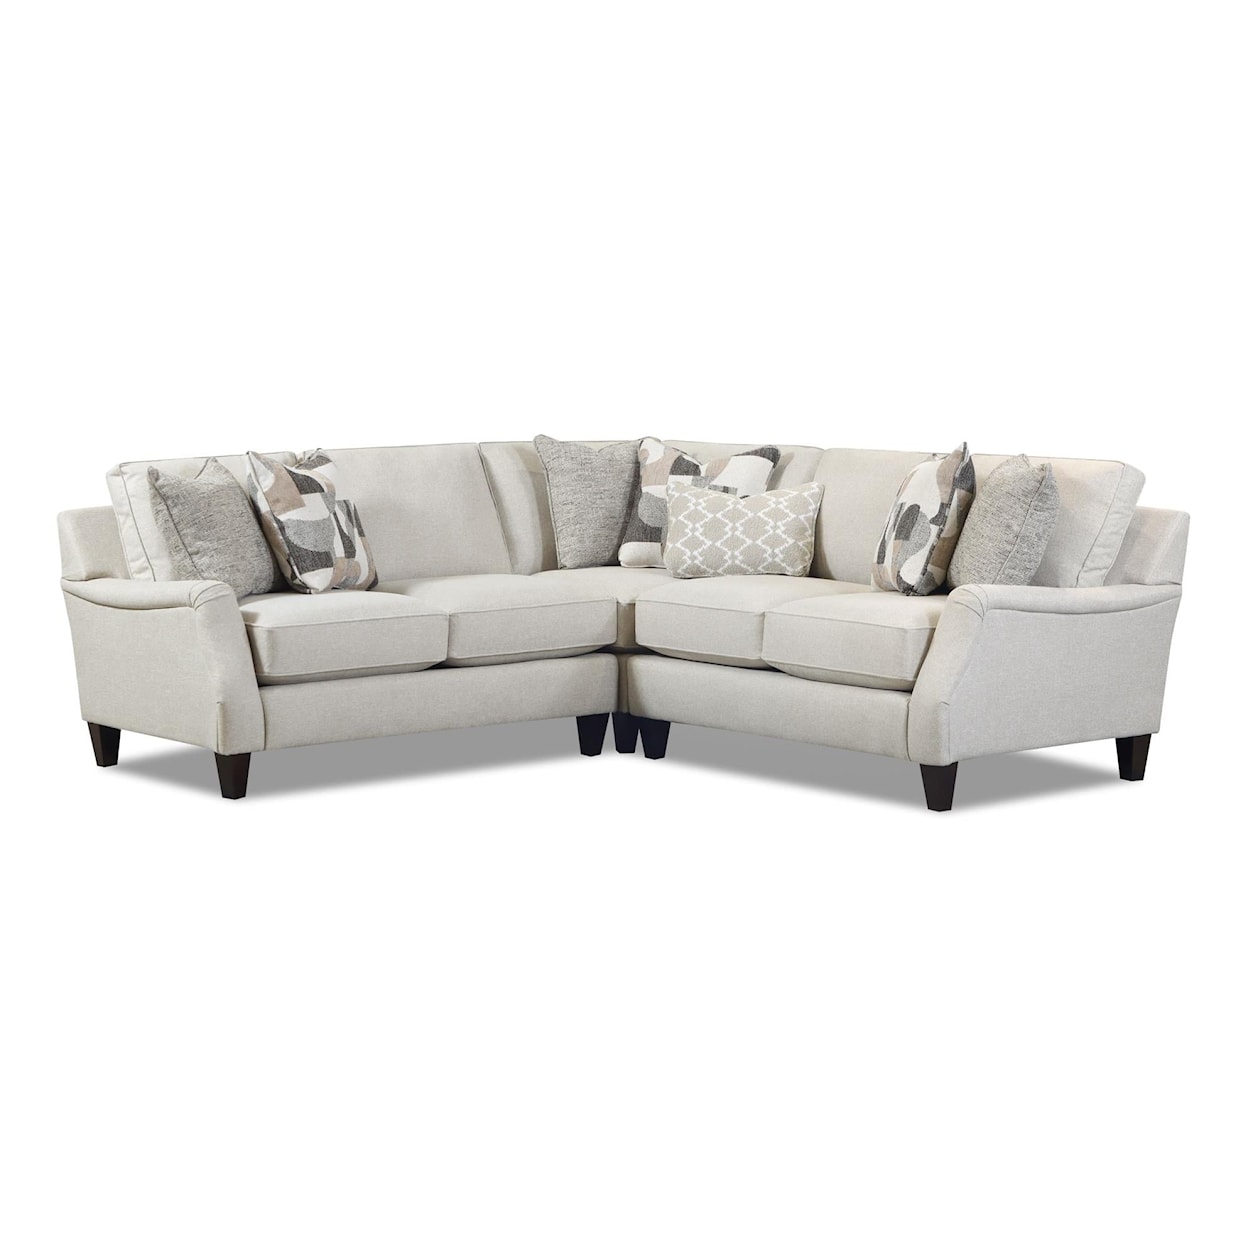 Fusion Furniture 7000 GOLD RUSH ANTIQUE Sectional